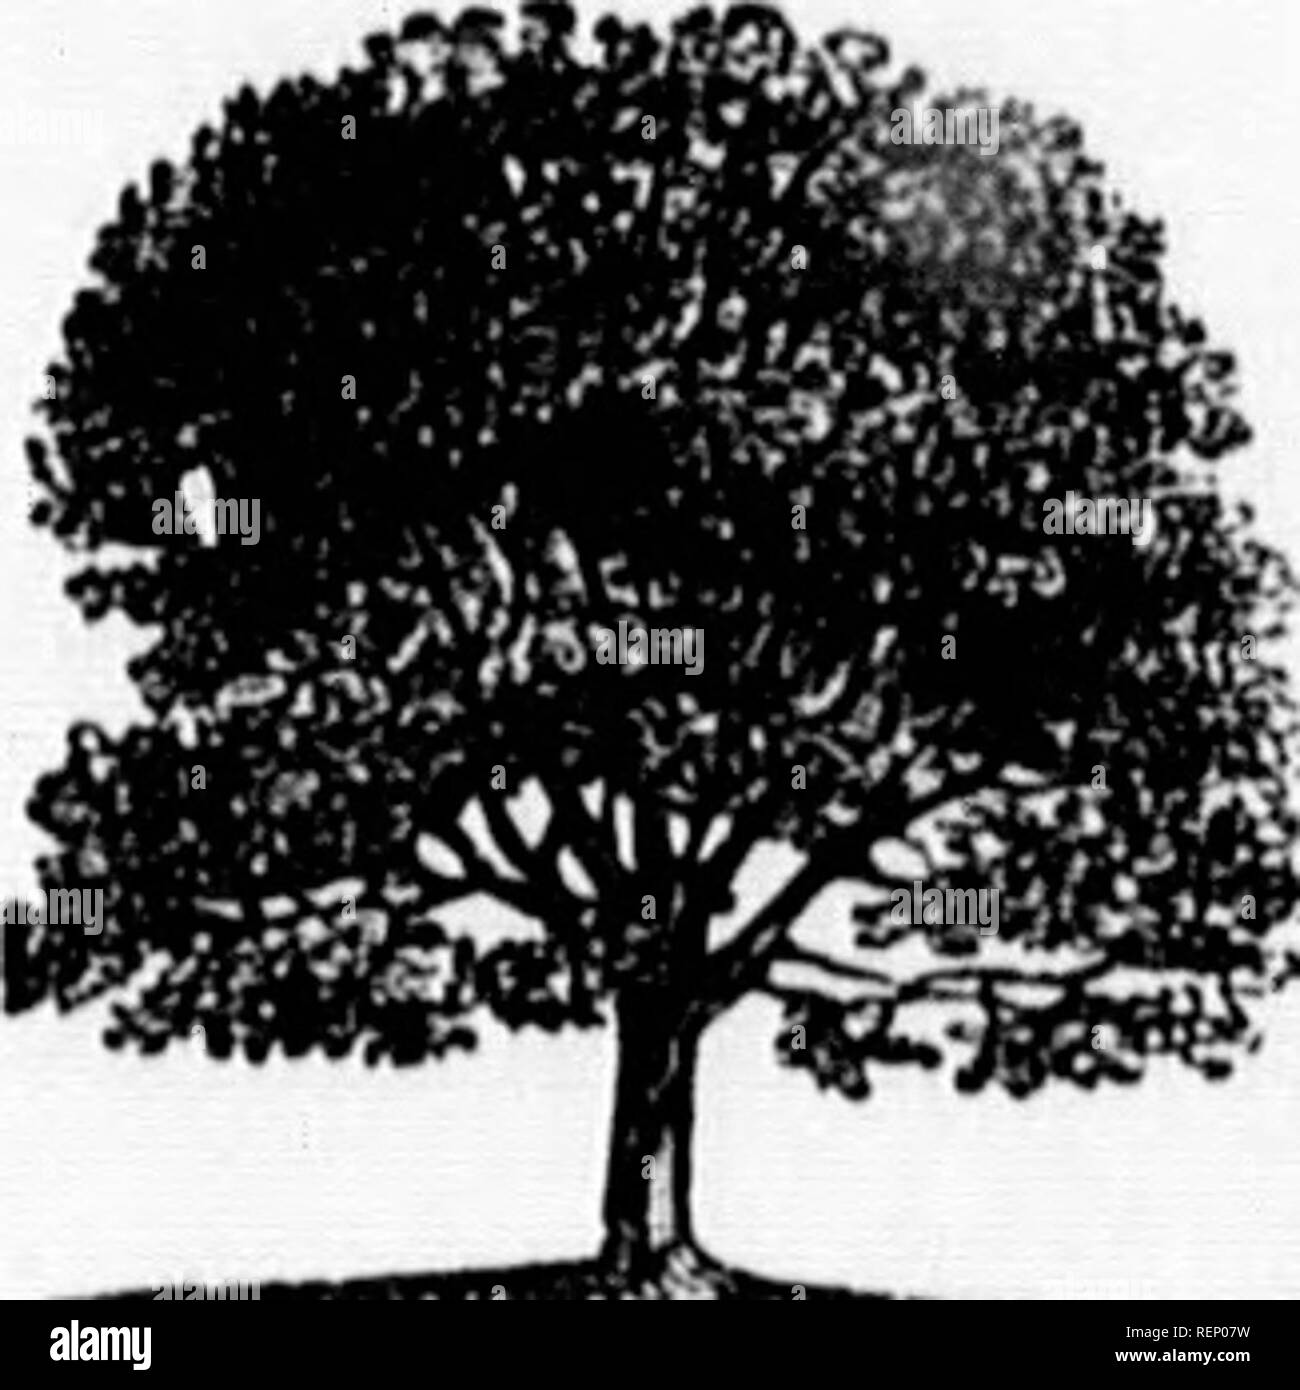 . The trees of America [microform] : native and foreign, pictorially and botanically delineated and scientifically and popularly described, being considered principally with reference to their geography and history, soil and situation, propagation and culture, accidents and diseases .... Trees; Arbres. iliat, who wroto Brousson cfia papijriferay THE PAPER MULBERRY-TREE. Synonymes. Murus papyrifera, Broussonetia papyrifera, LiNN^us, Species Plantarum. Don, Miller's Dioiionary. Loudon, Arboretum Jirilannicuin. Broussonetia a papier, Milrier a papier, ) -r, Jlilrier de la Chine, Papyrier, France. Stock Photo